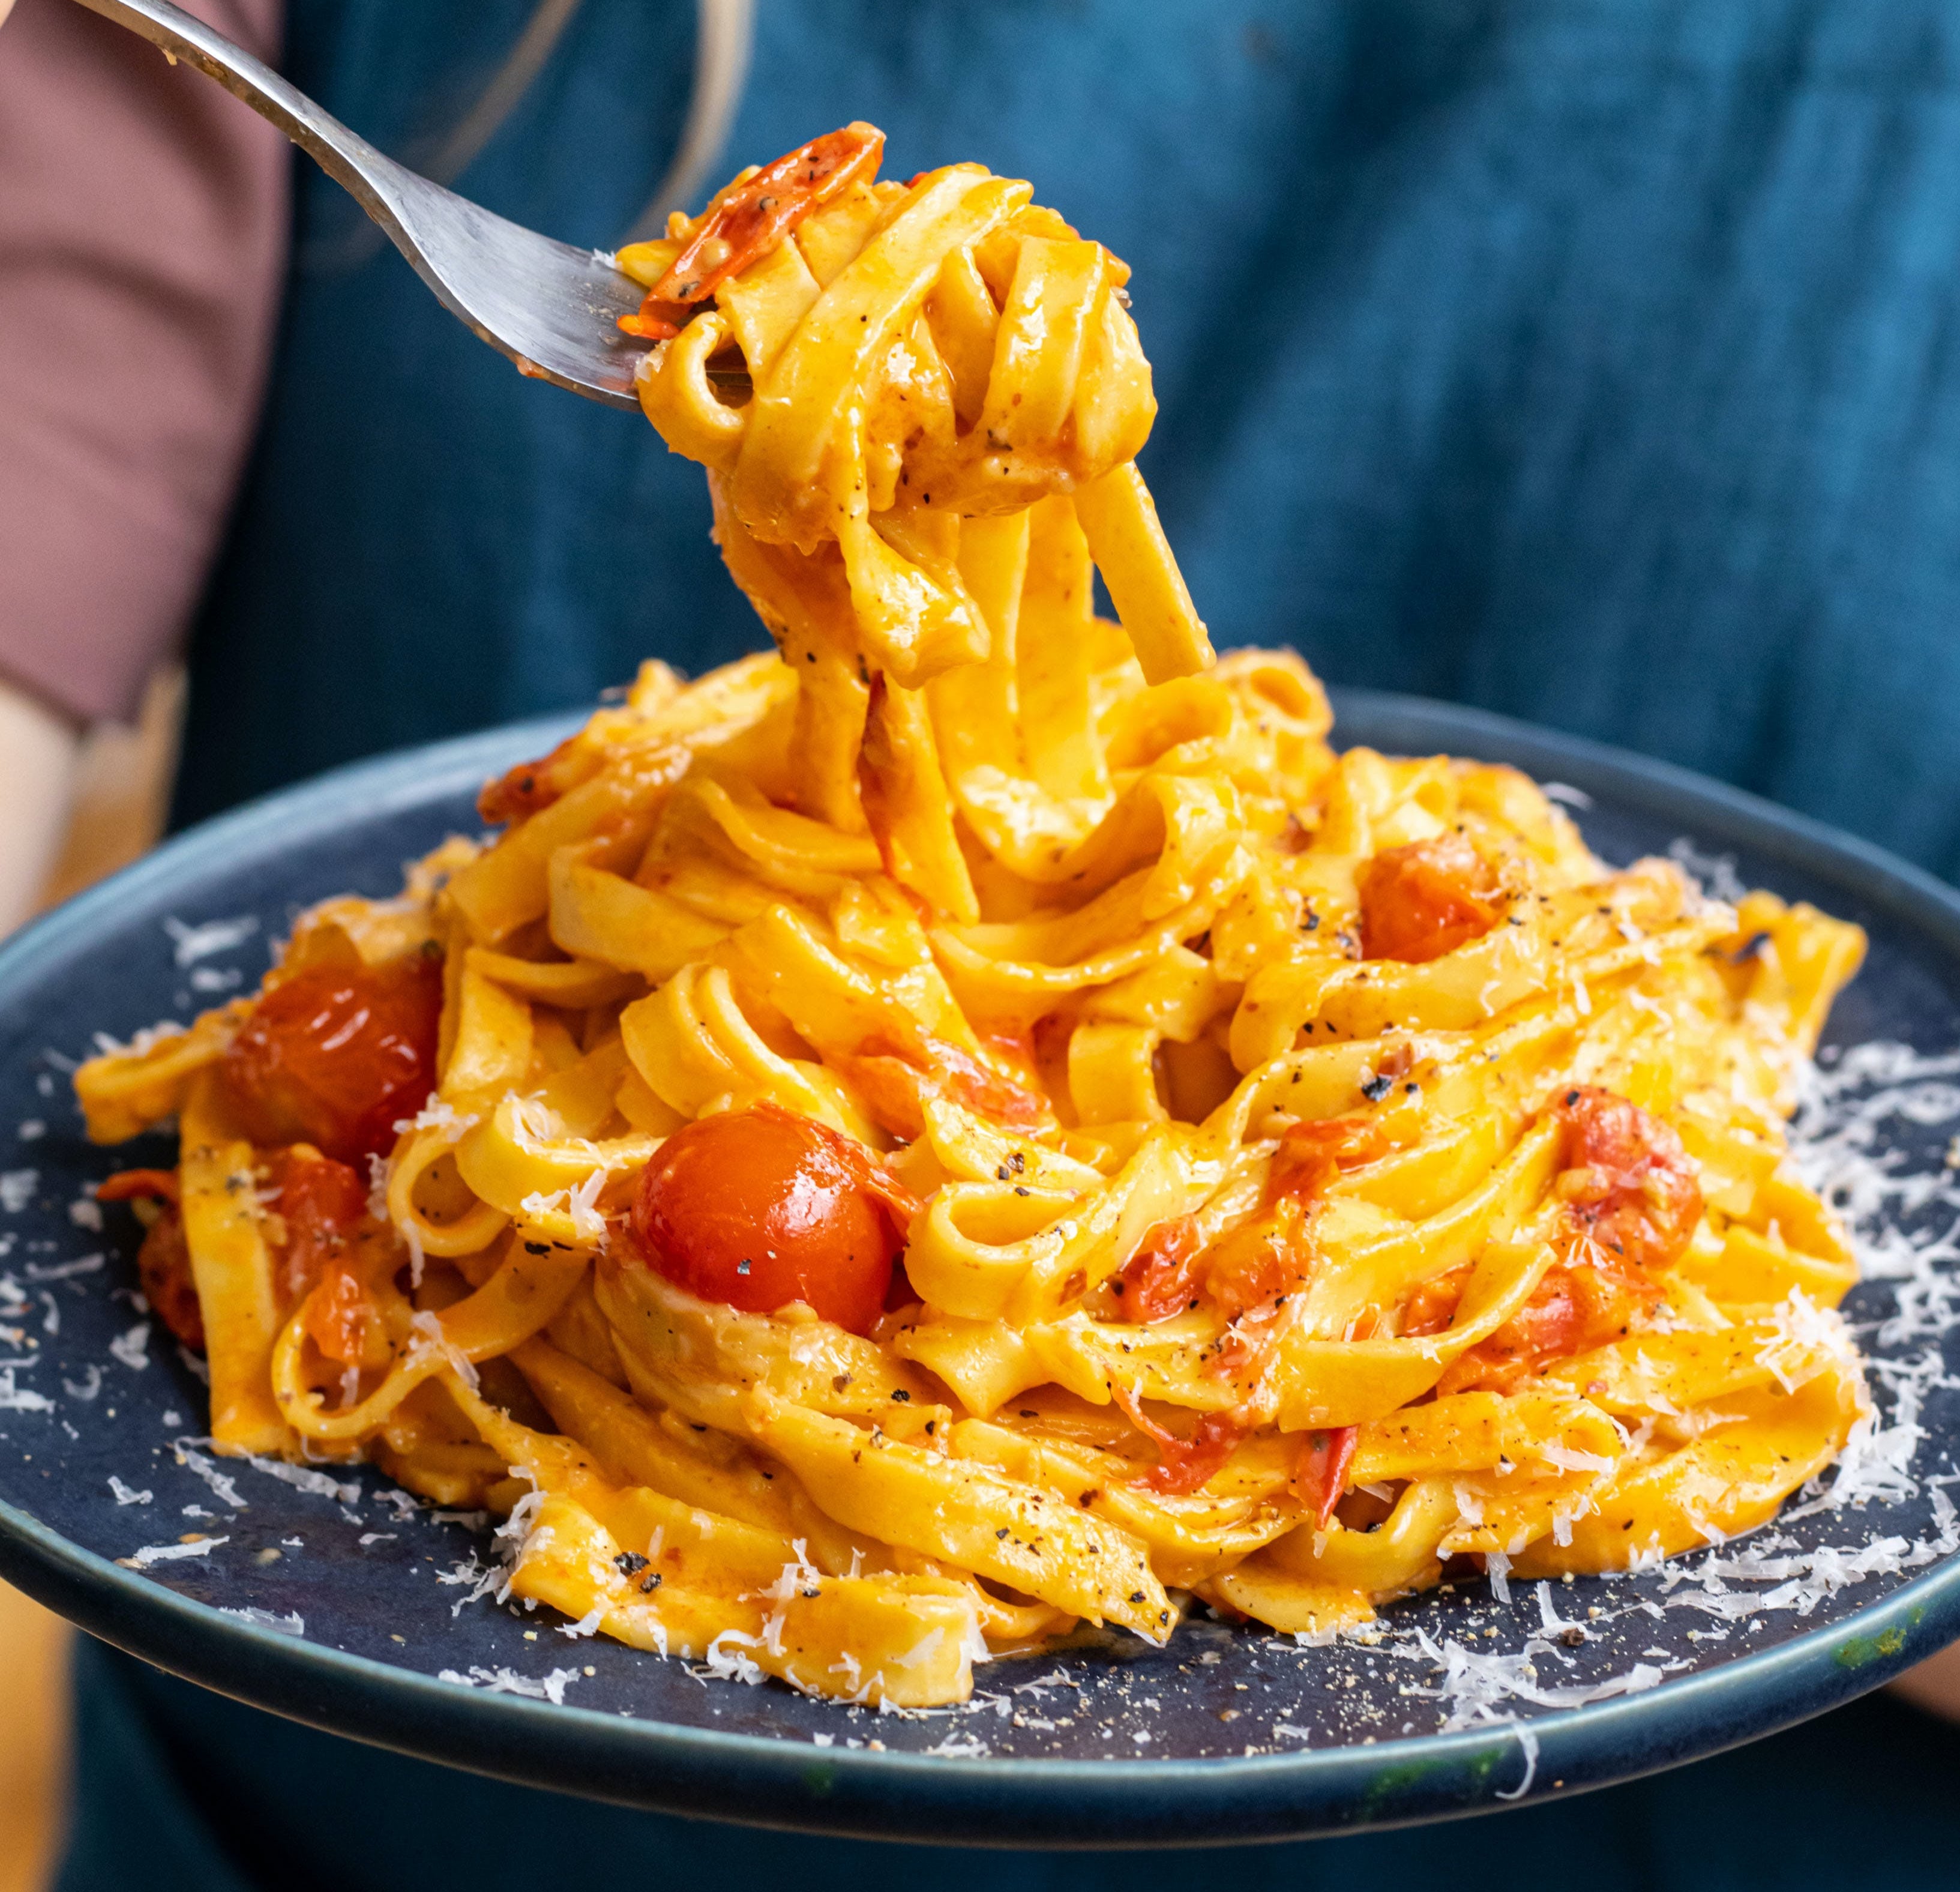 Making your own pasta is a labour of love but it’s worth it for this roasted tomato and mascarpone tagliatelle